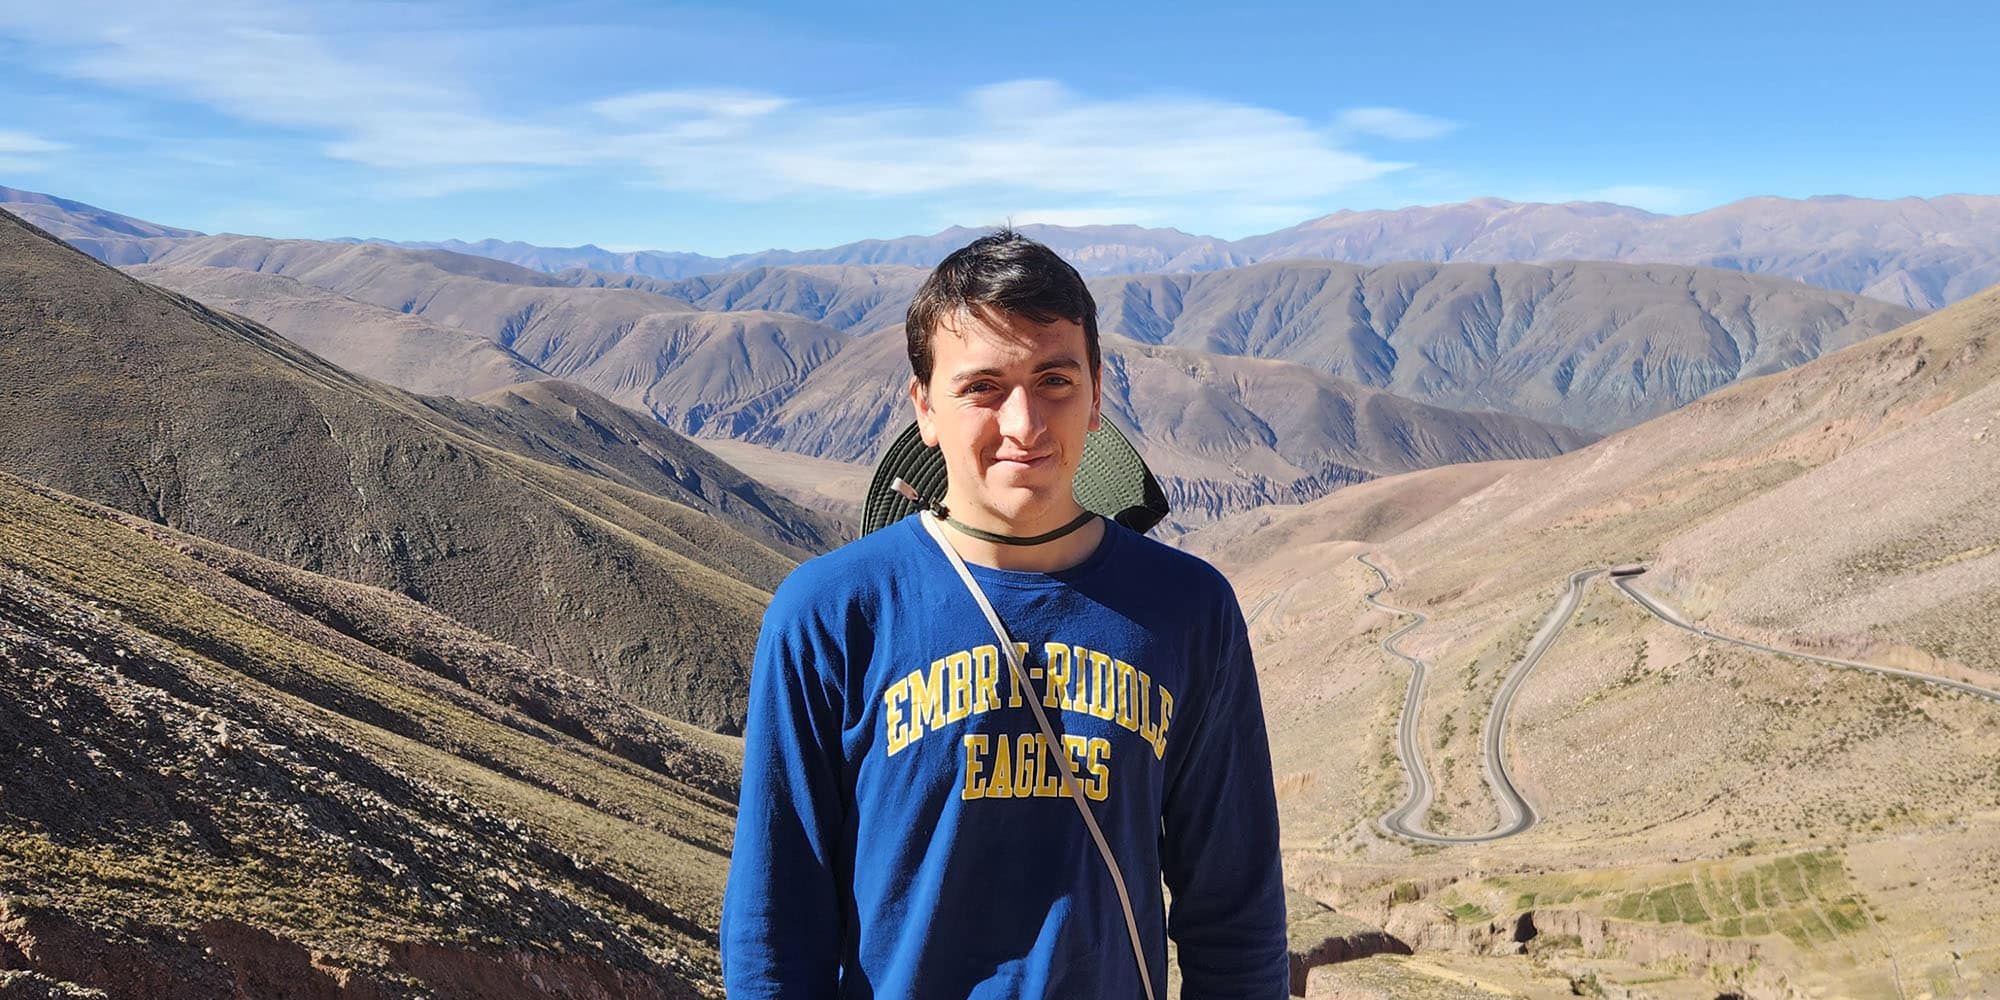 Zackrey poses, squinting into the camera, with a background of brown and gold canyon stretching into the distance. He has light skin tone and is wearing an Embry-Riddle Eagles sweatshirt and a safari hat hanging around his neck.